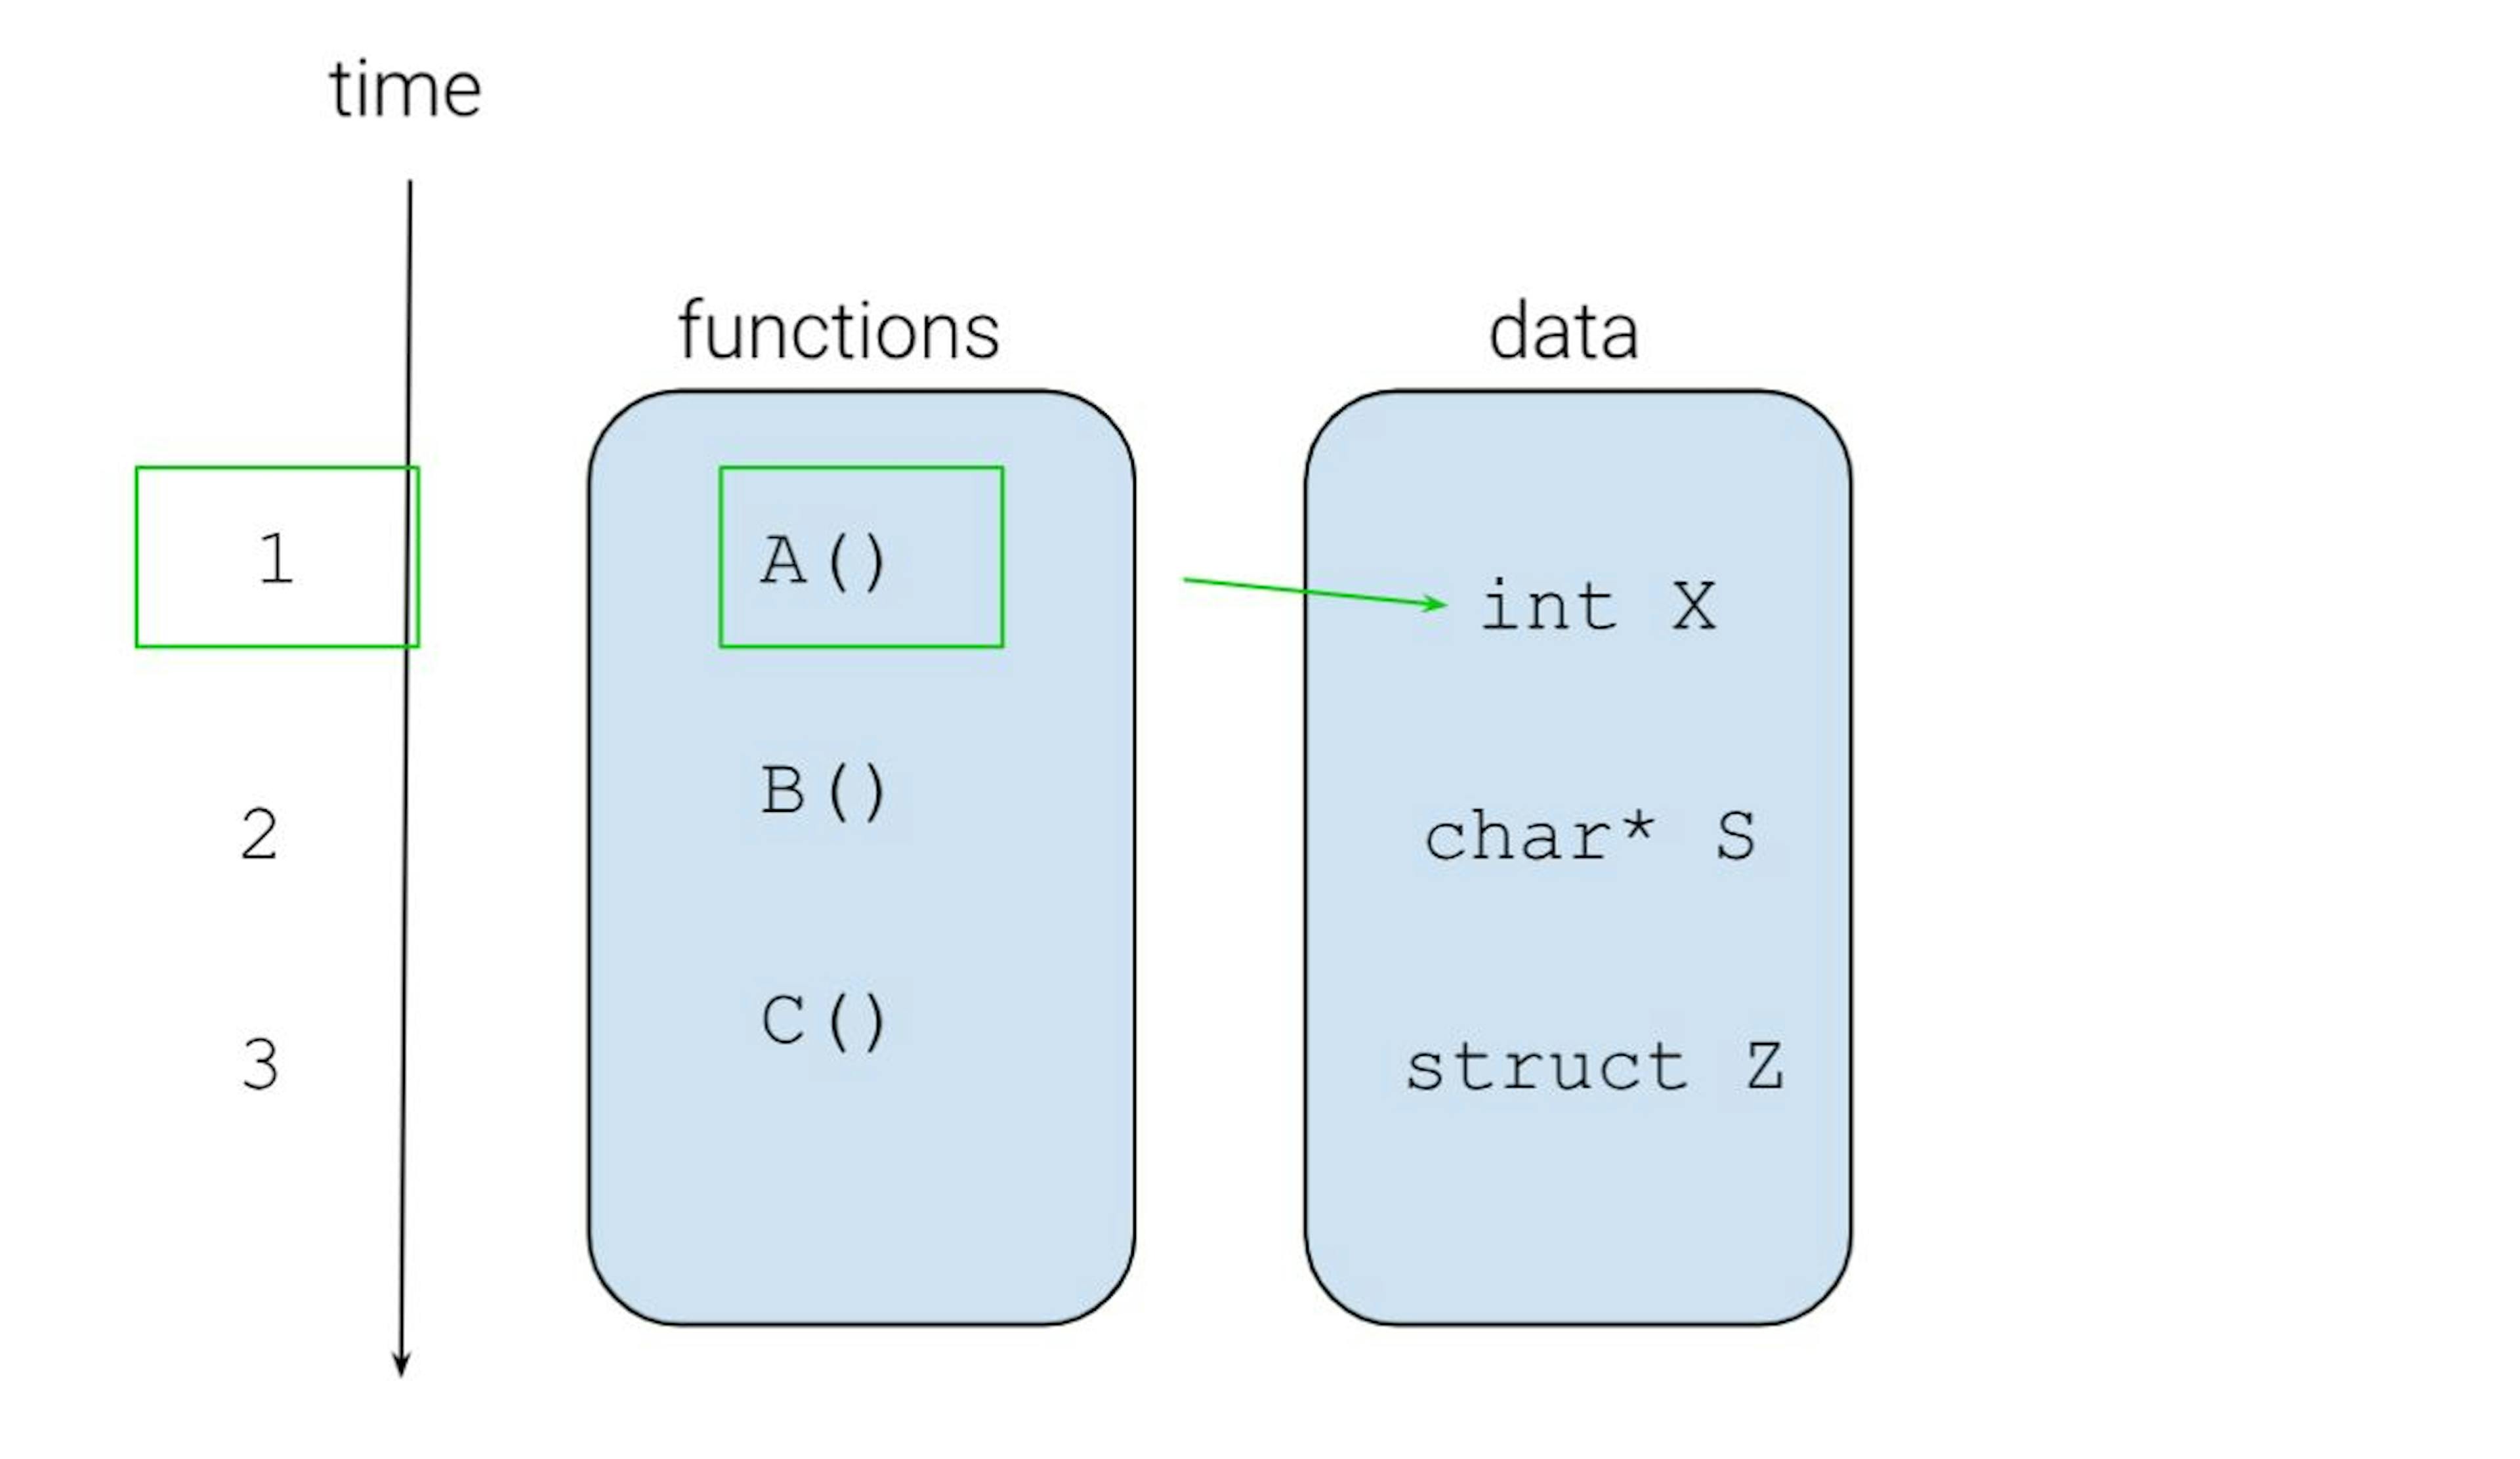  Multiple functions now work with data concurrently: